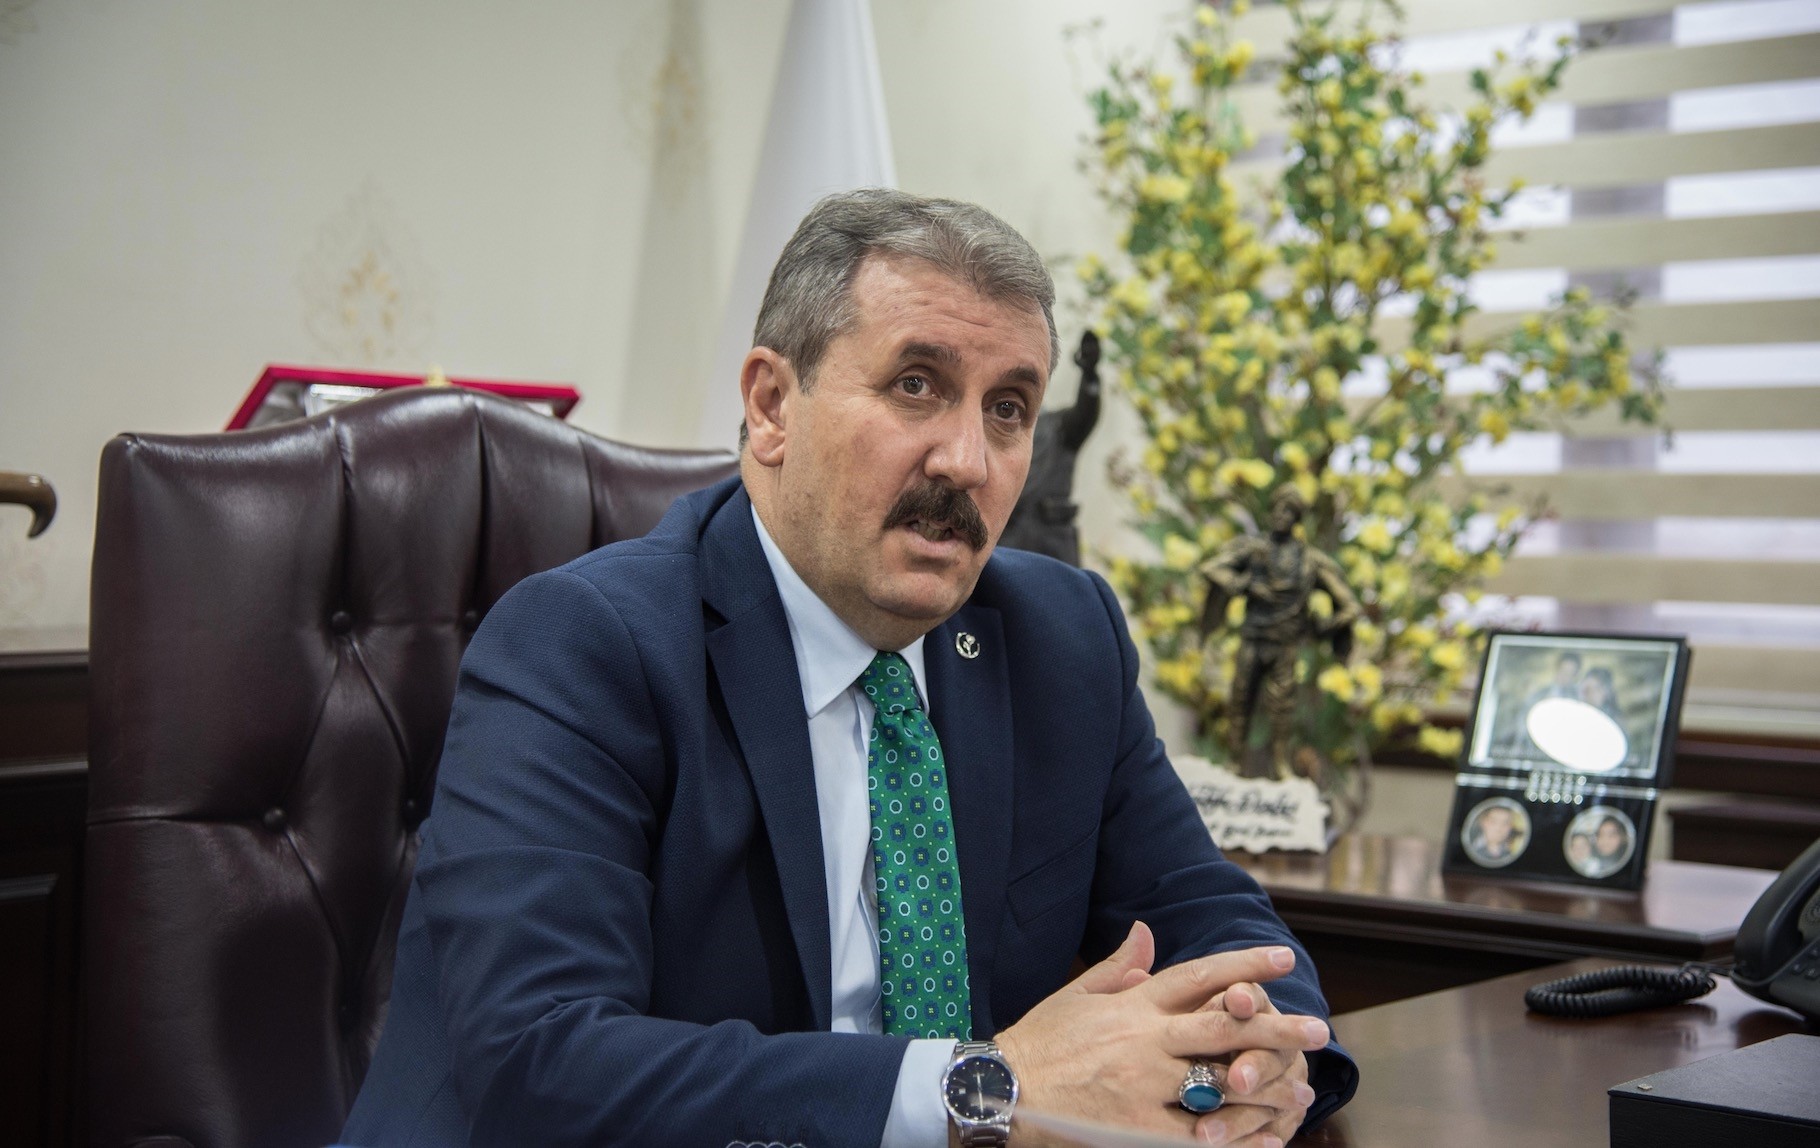 BBP Chairman Mustafa Destici expressed that their support for the alliance is not something new since they were always against the political system and the constitution drawn up after the 1980 coup.